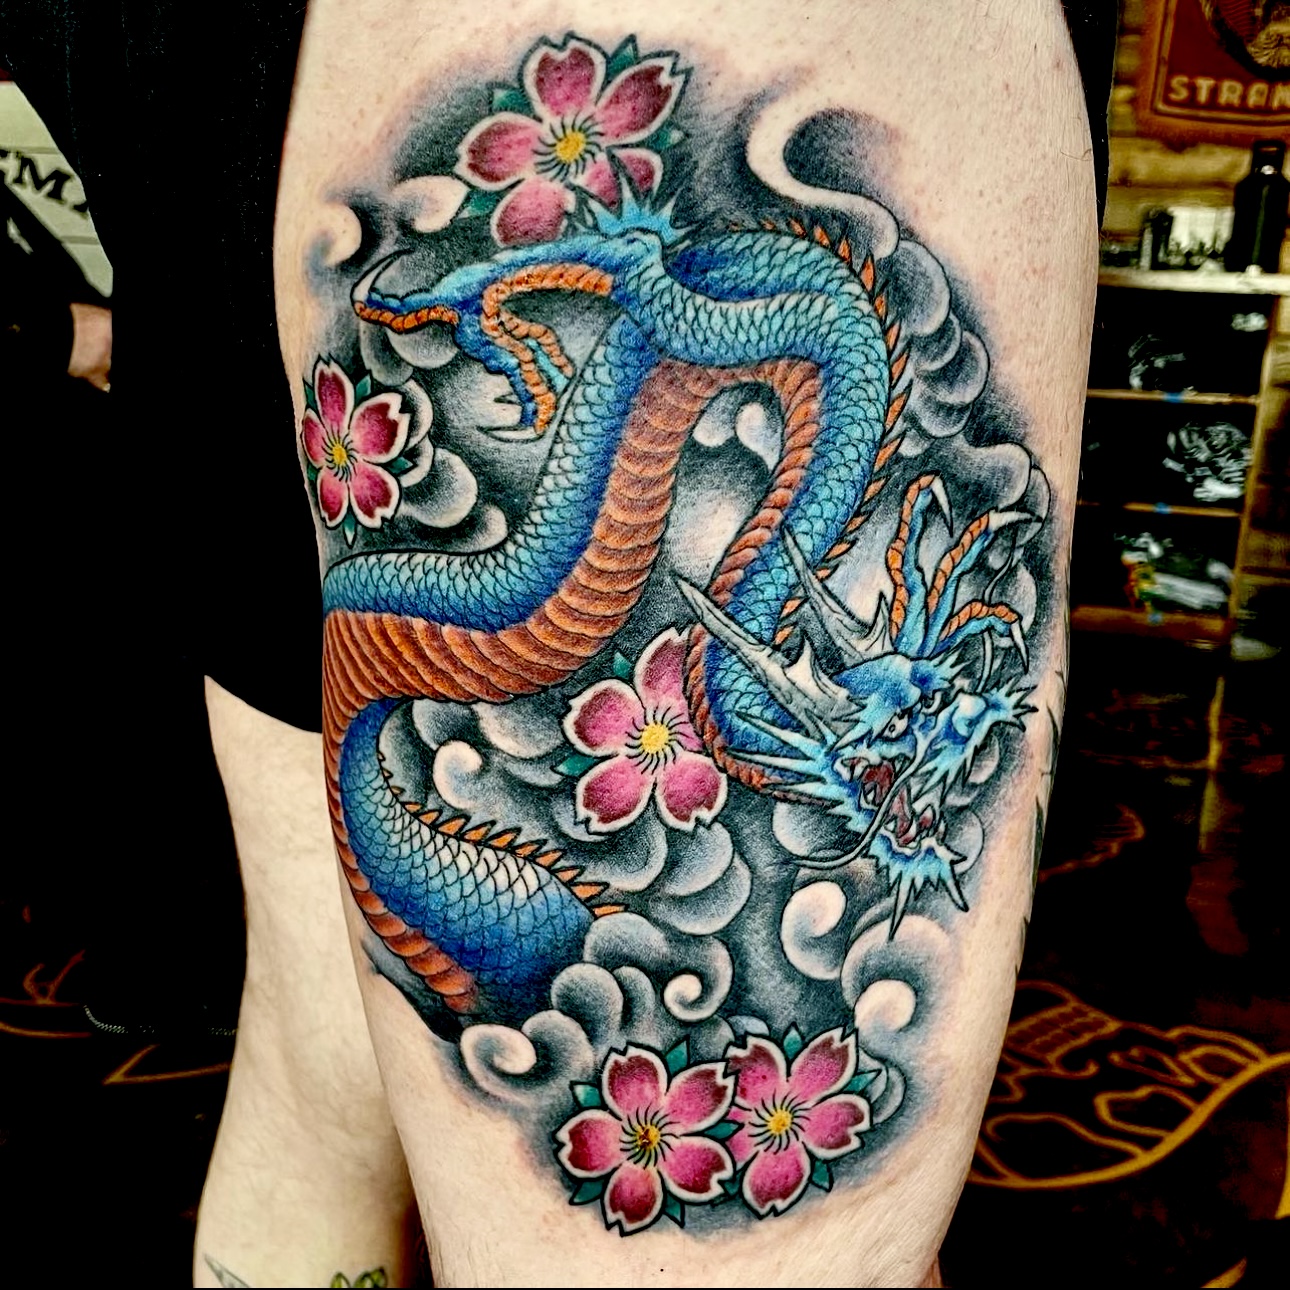 Tattoo of a blue dragon and pink flowers